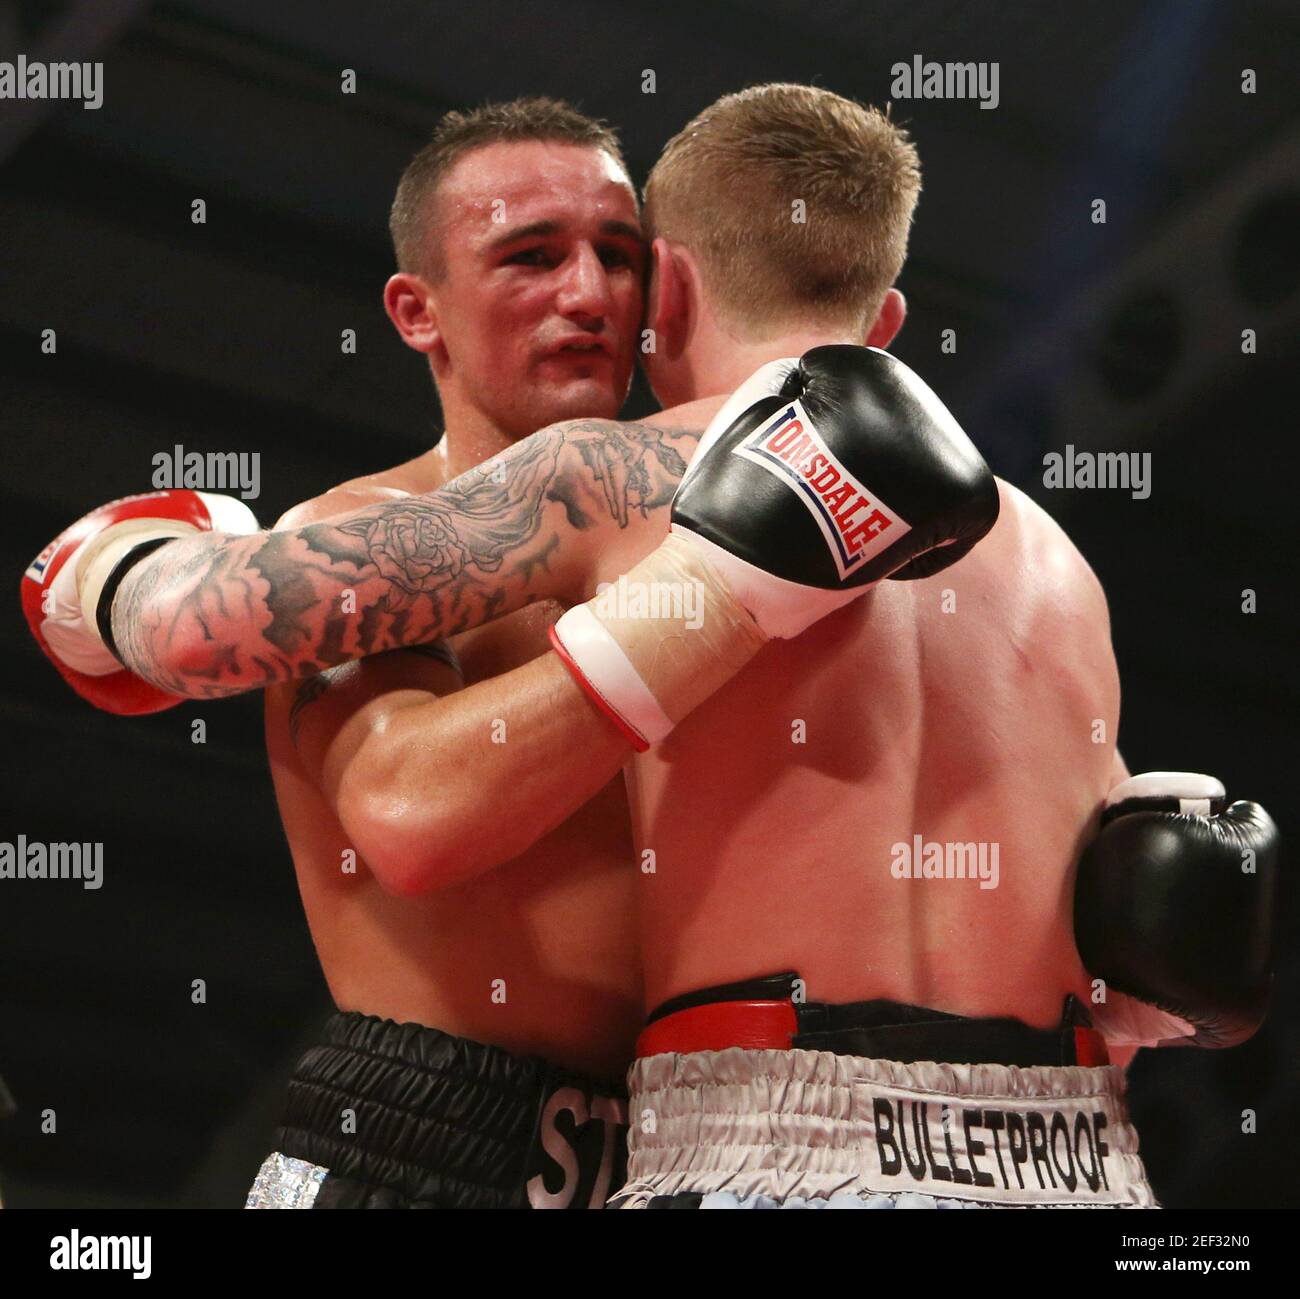 Boxing - Steve Williams v Kirk Goodings - British Masters Light Welterweight Title - Aintree Equestrian Centre - 30/11/12  Steve Williams and Kirk Goodings after their fight  Mandatory Credit: Action Images / Carl Recine Stock Photo